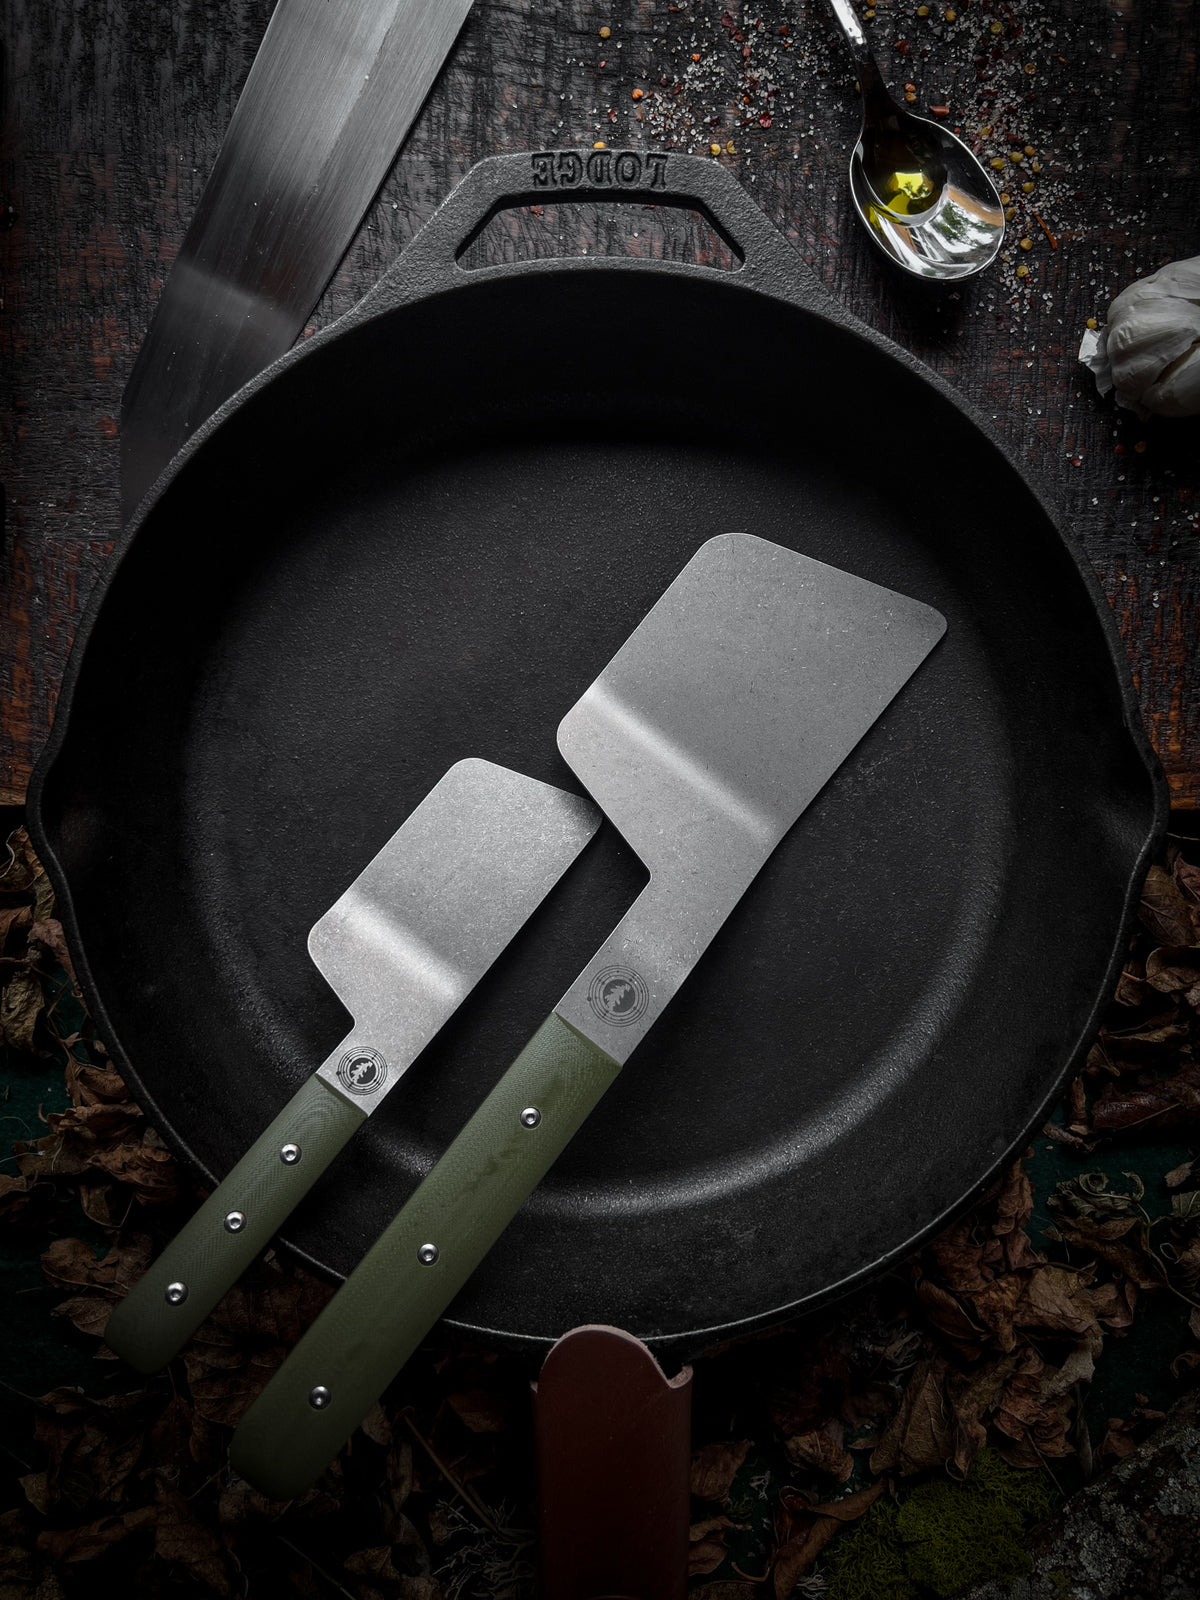 a full size and mini size green handle spatula sitting in a skillet